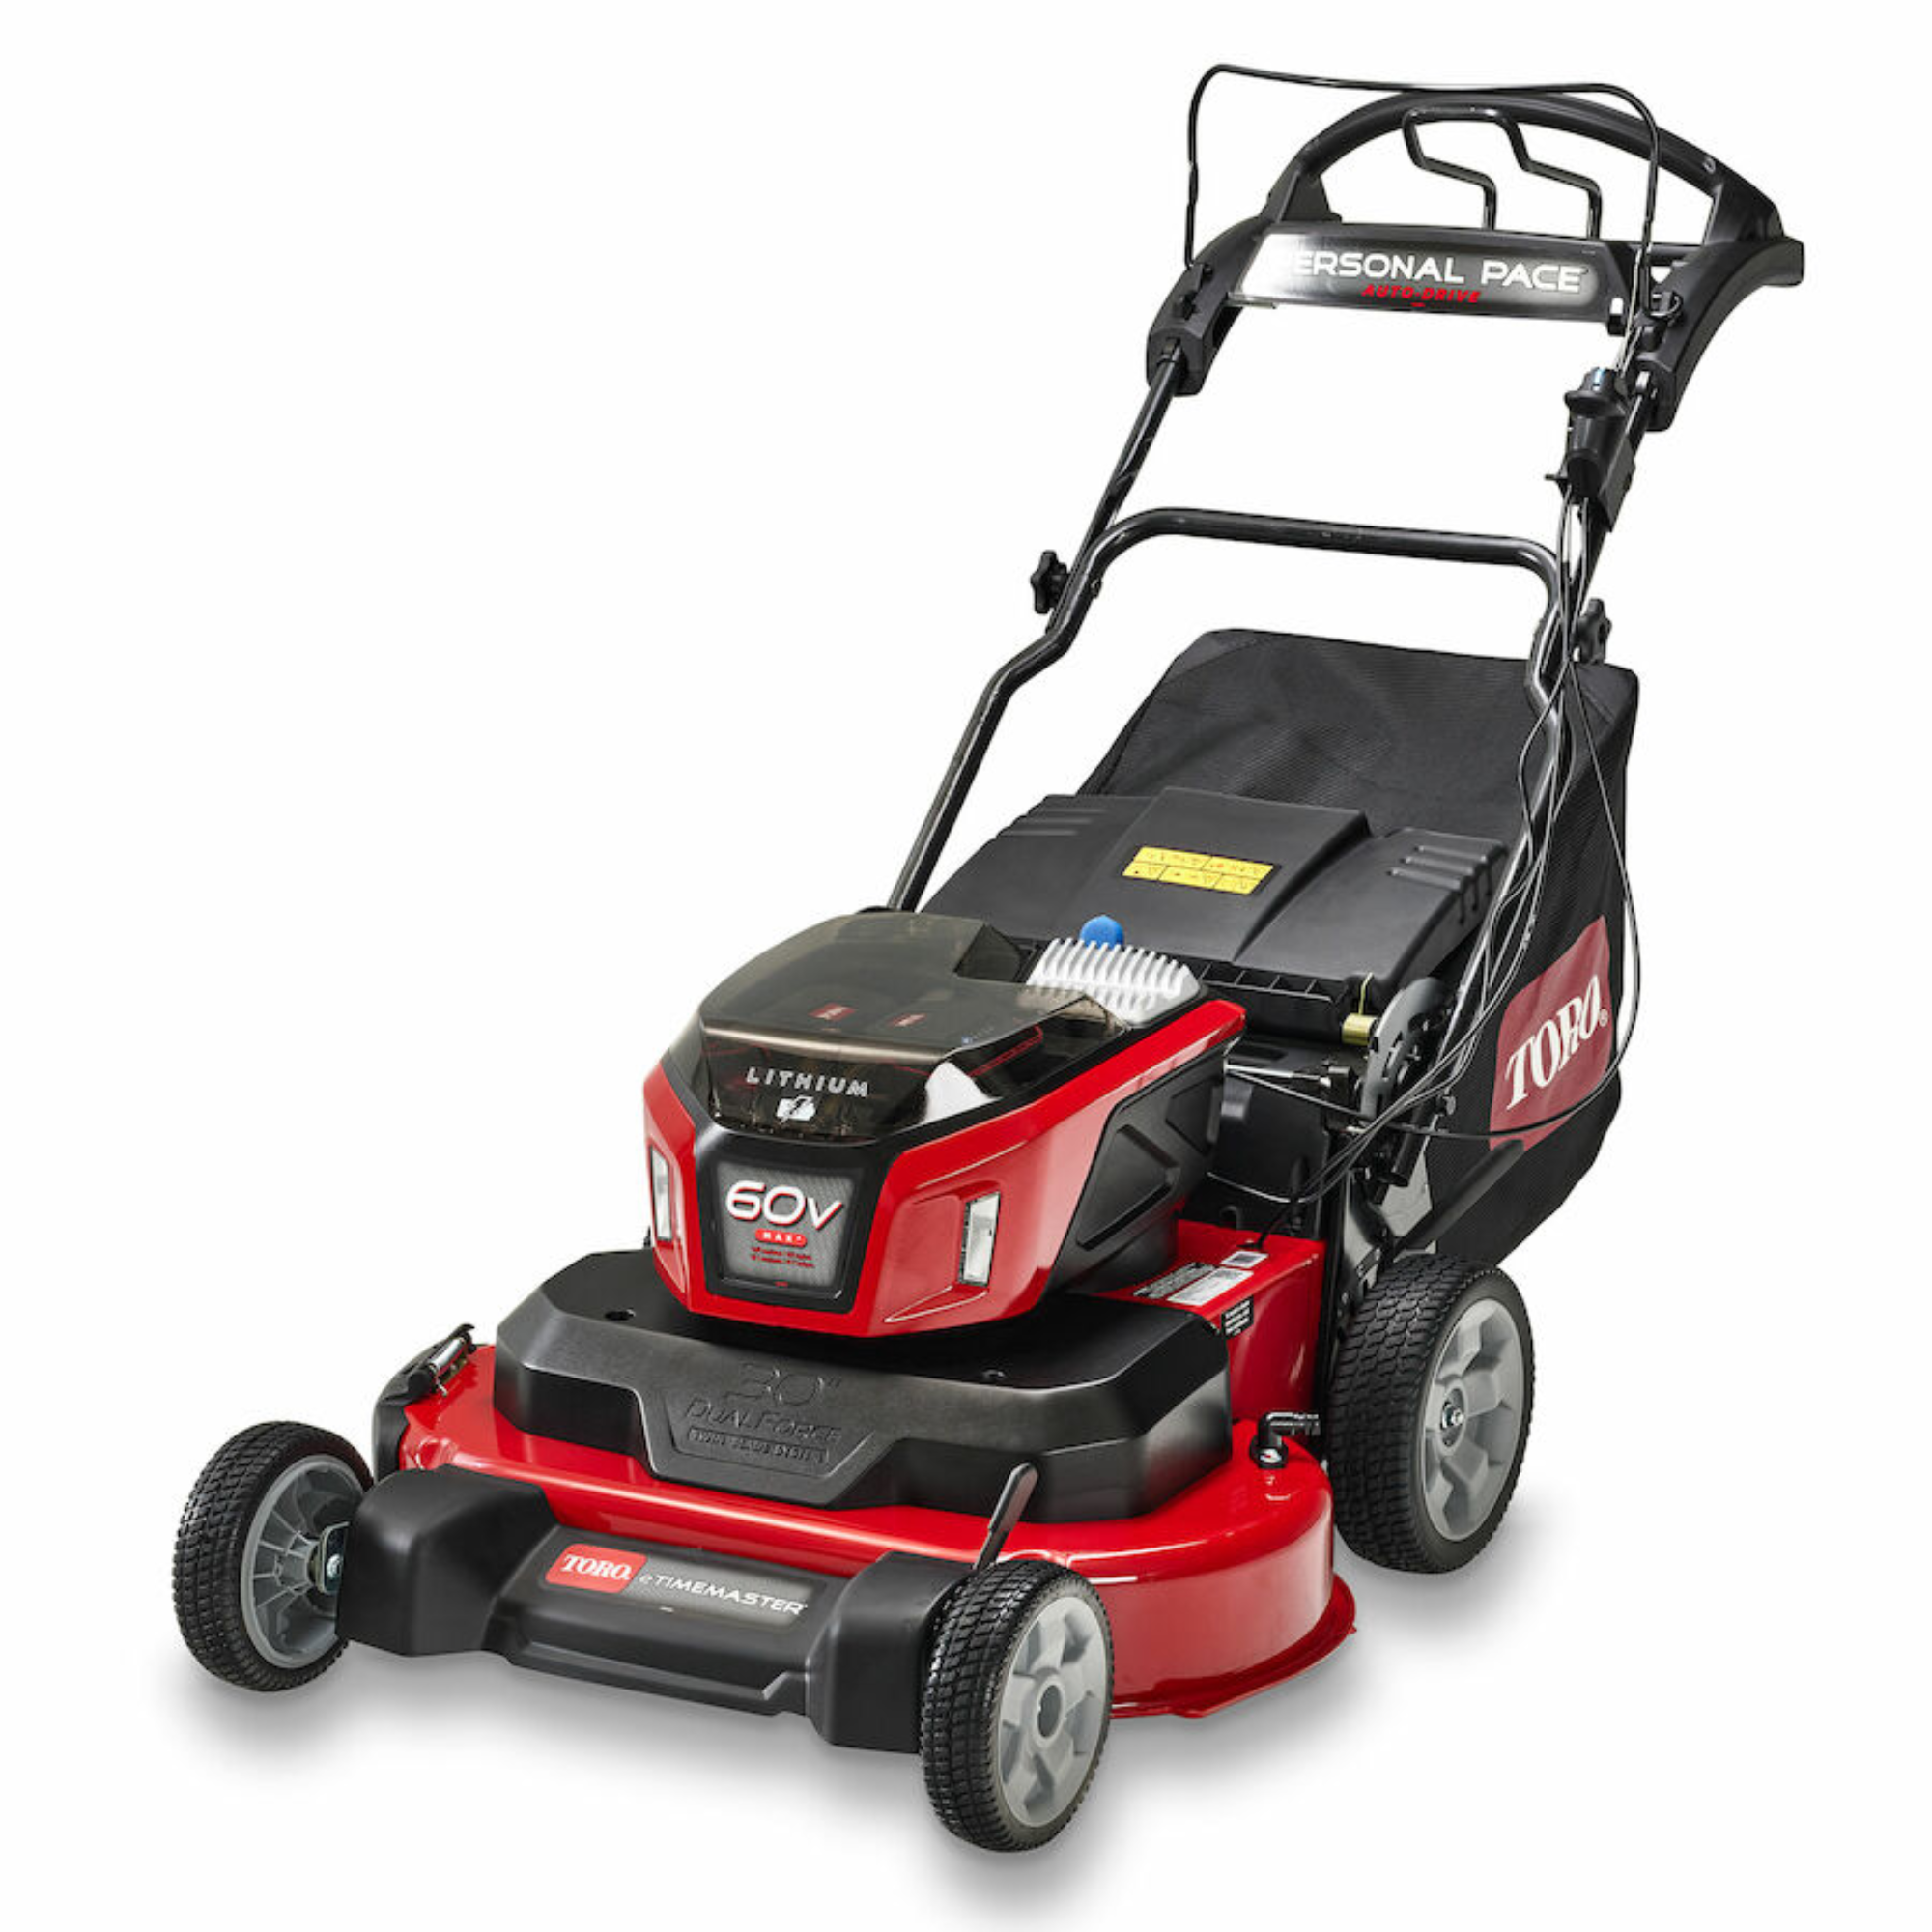 Toro 60V MAX 30 in. eTimeMaster Personal Pace Auto-Drive Lawn Mower Batteries/Chargers Included